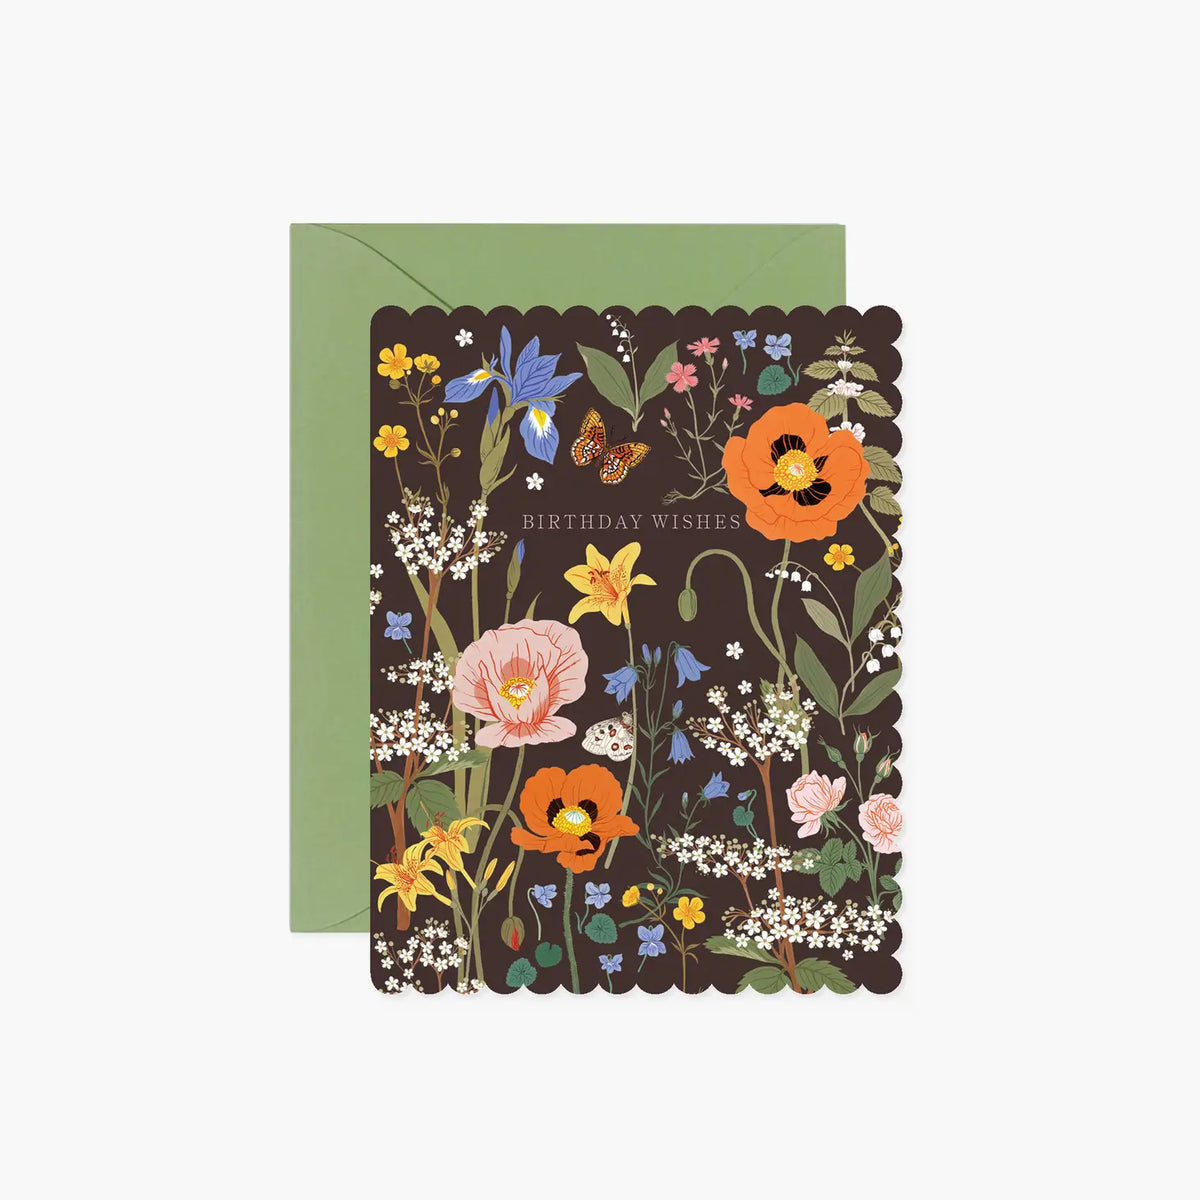 Birthday card 'Wild flowers' by Botanica Paper co.